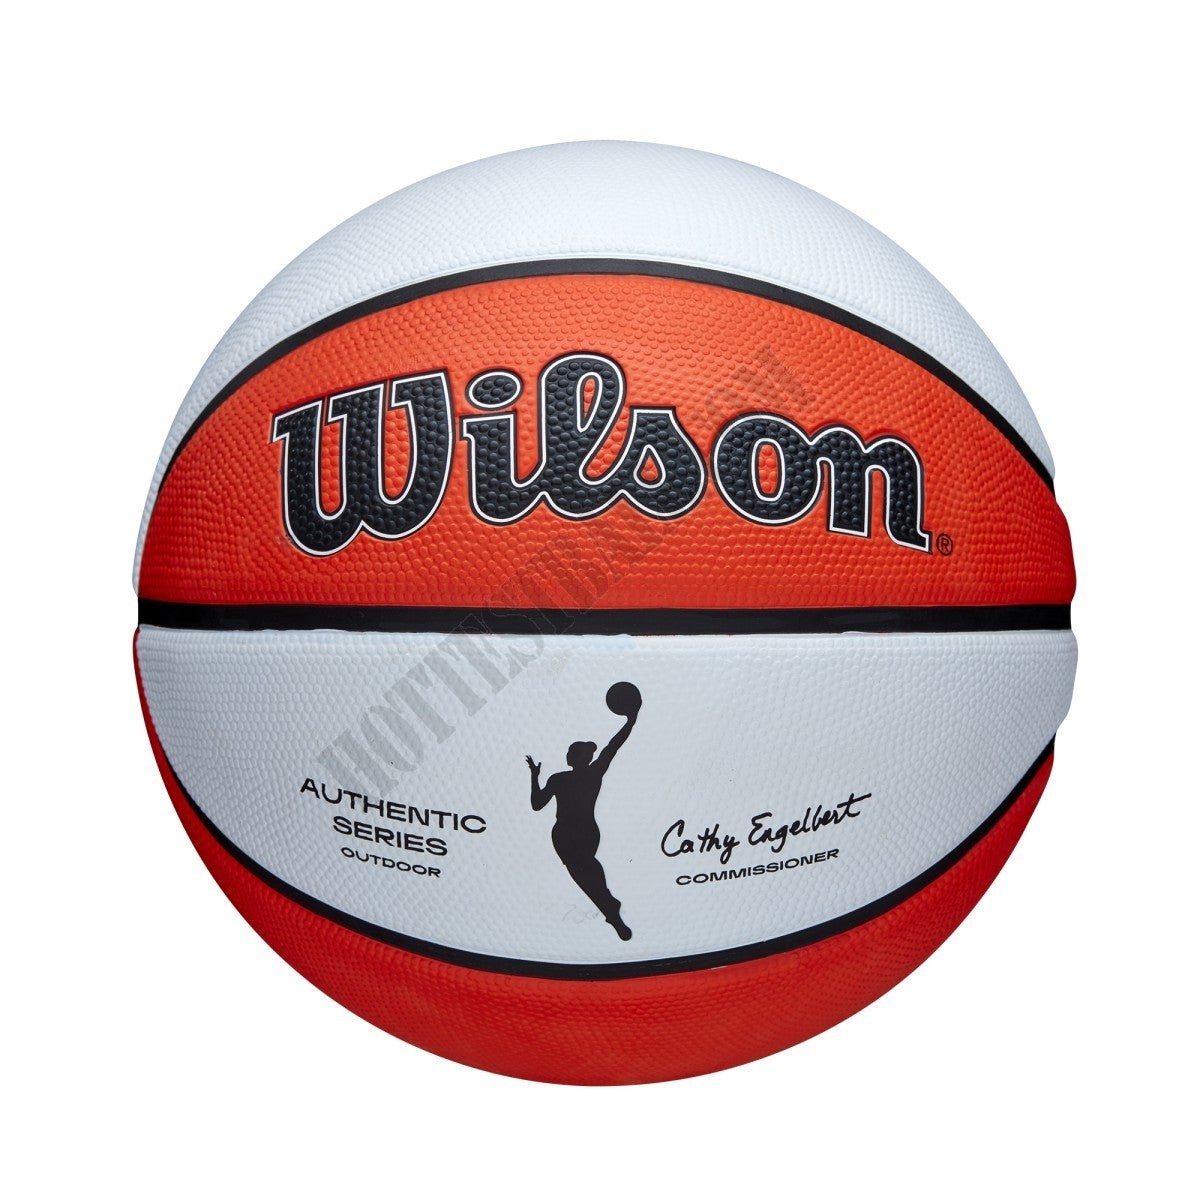 WNBA Authentic Outdoor Basketball - Wilson Discount Store - WNBA Authentic Outdoor Basketball - Wilson Discount Store